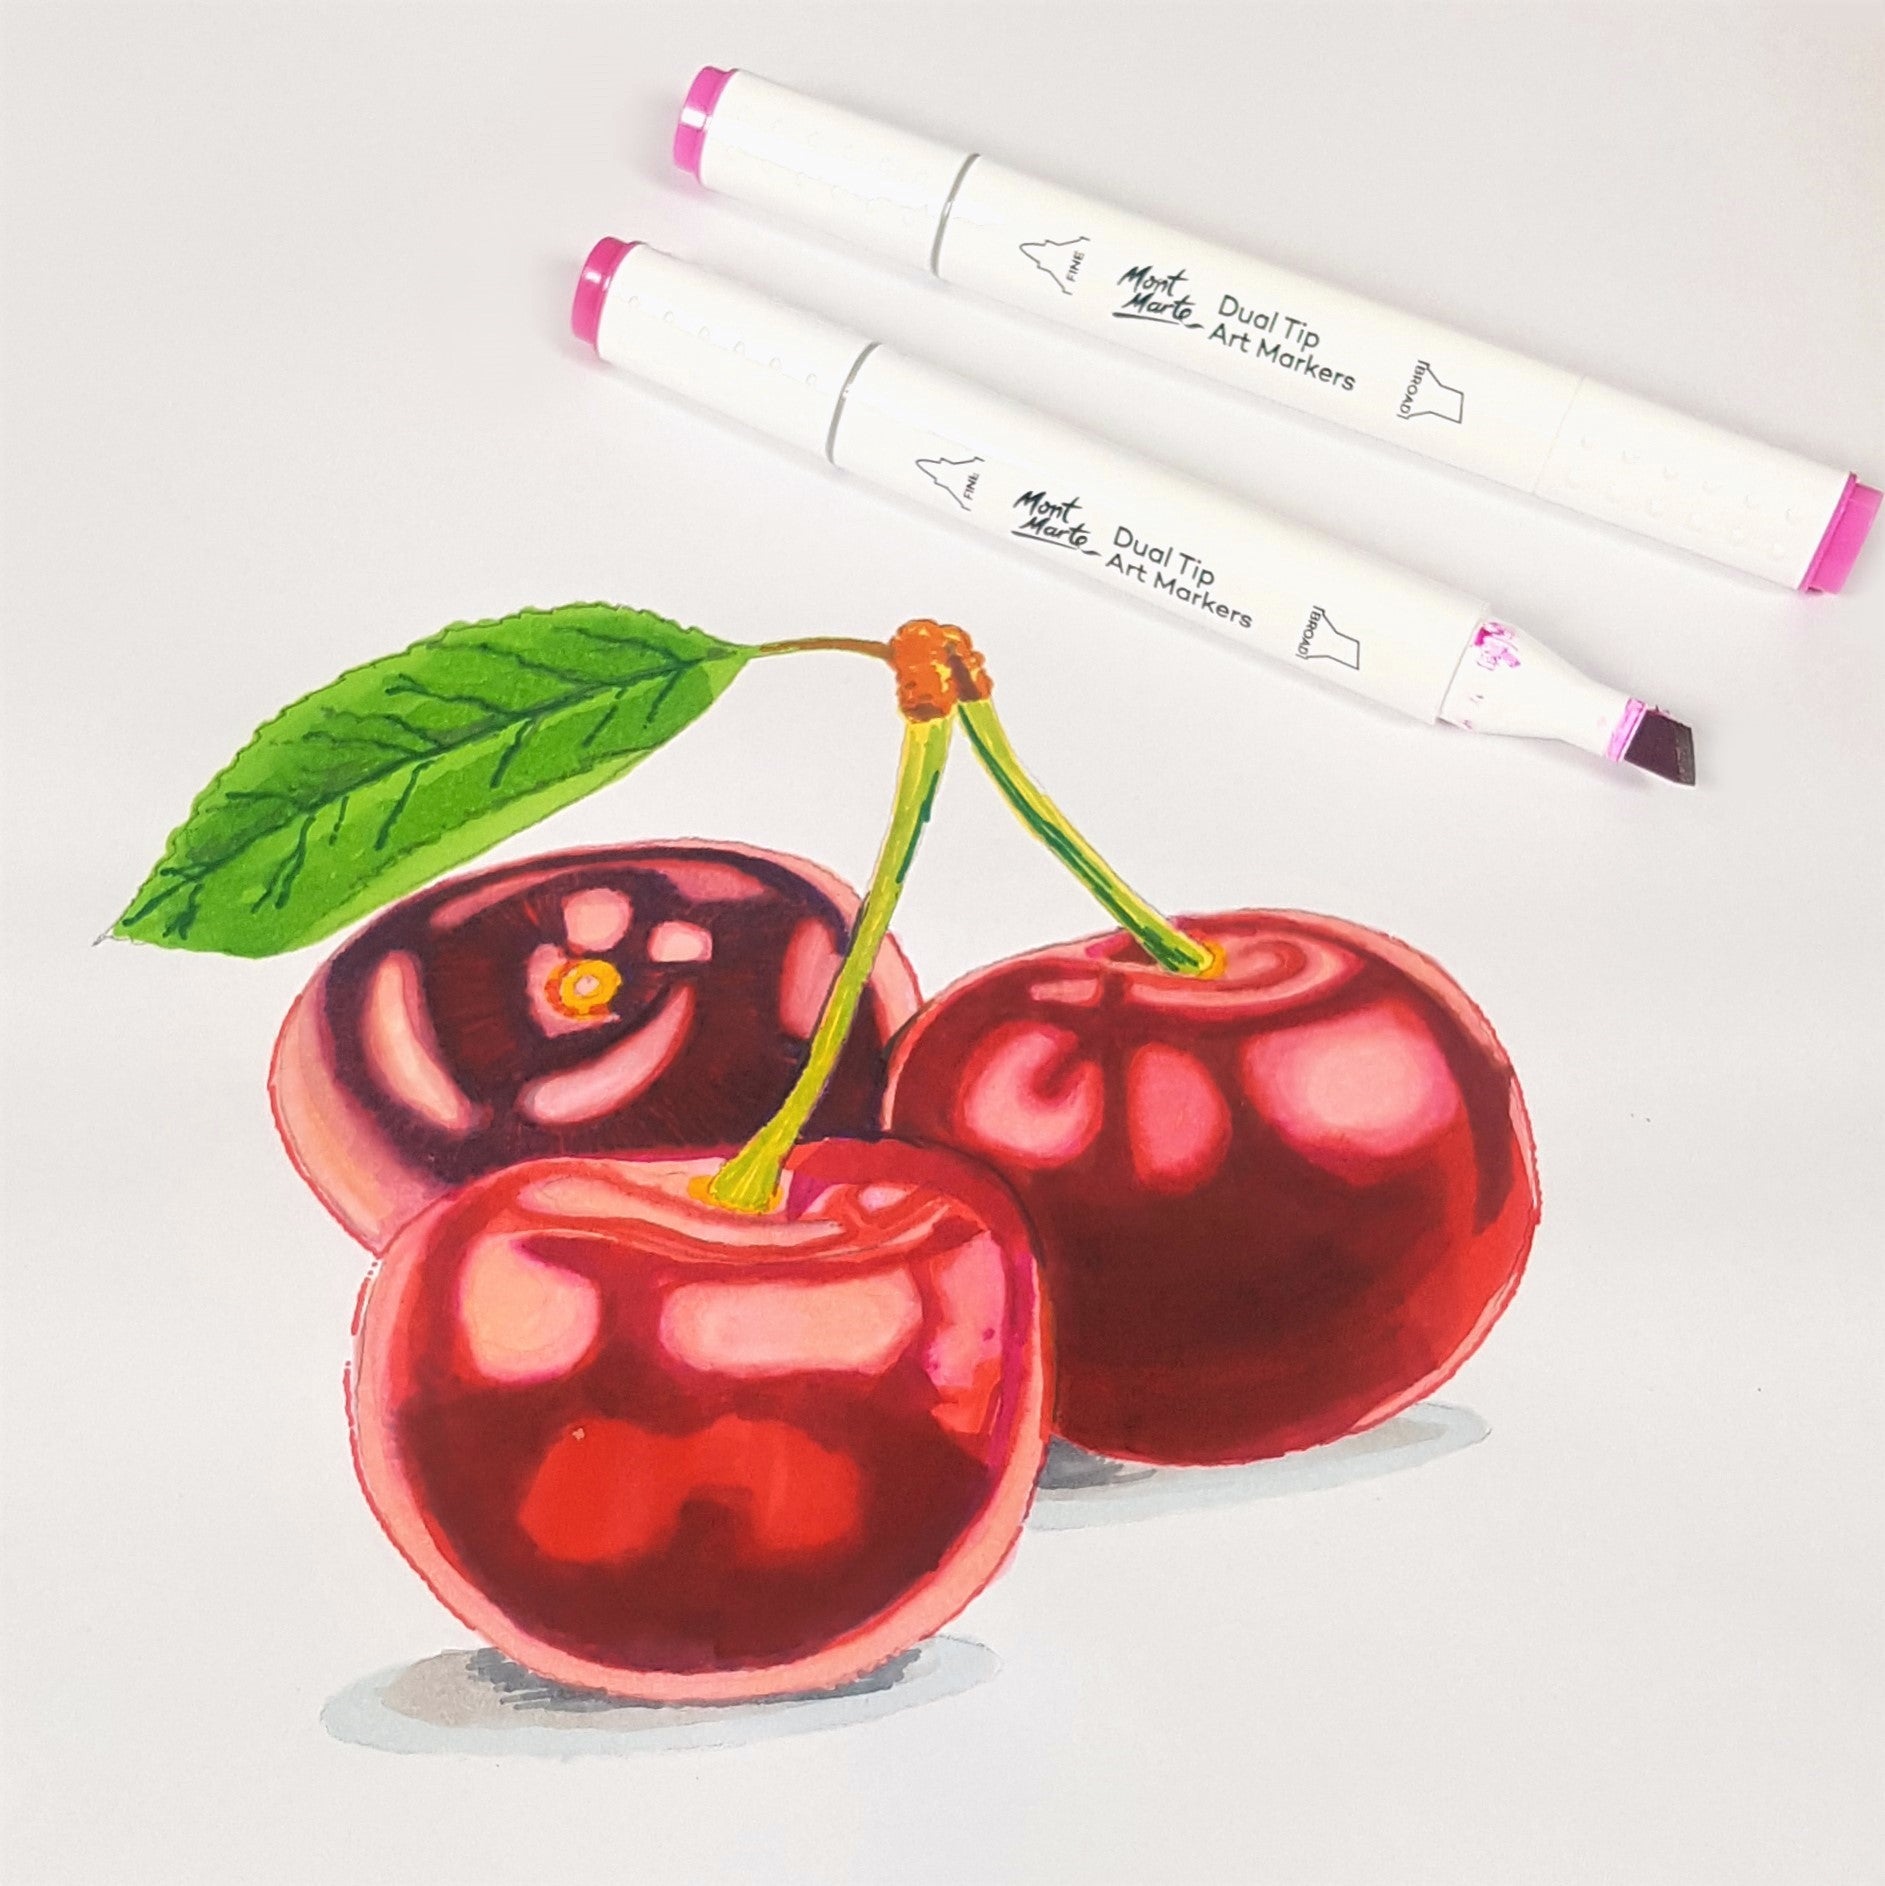 4. 3 cherries drawn with alcohol markers